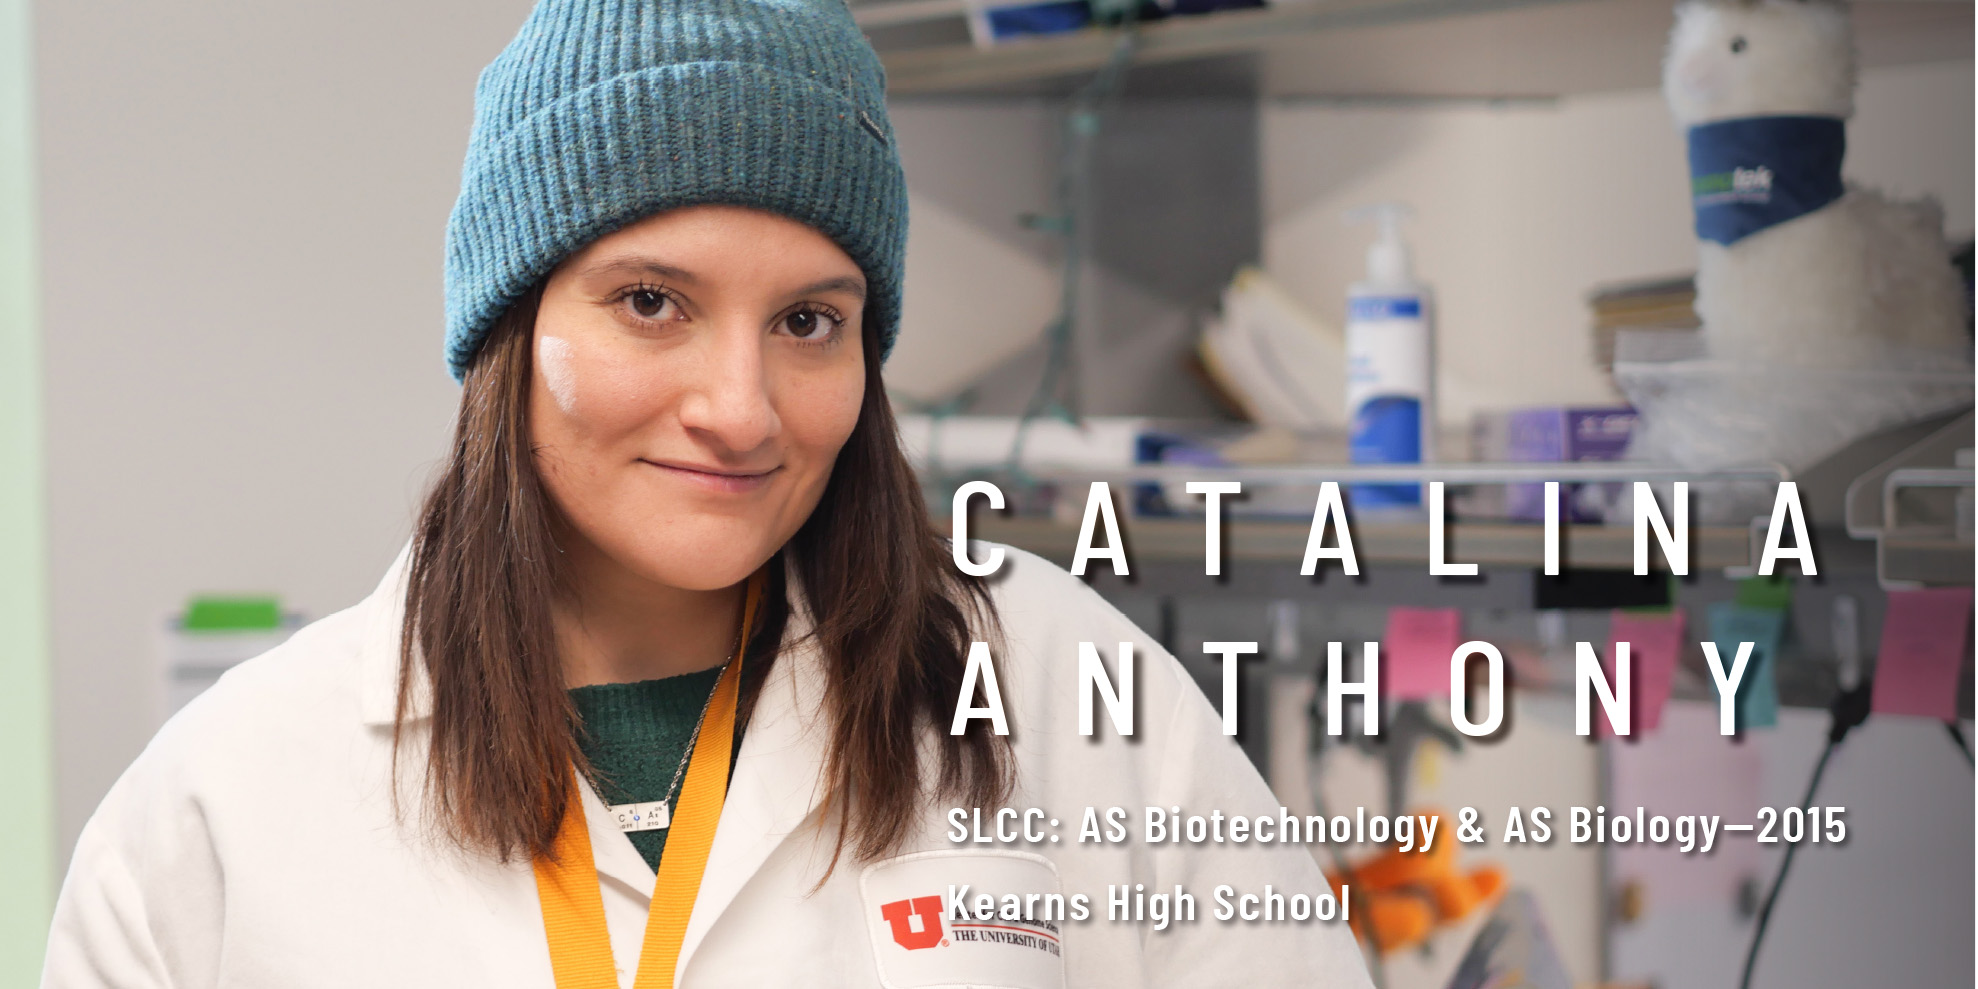 Catalina Anthony, SLCC AS Biotechnology & AS Biology in 2015, From Kearns High School